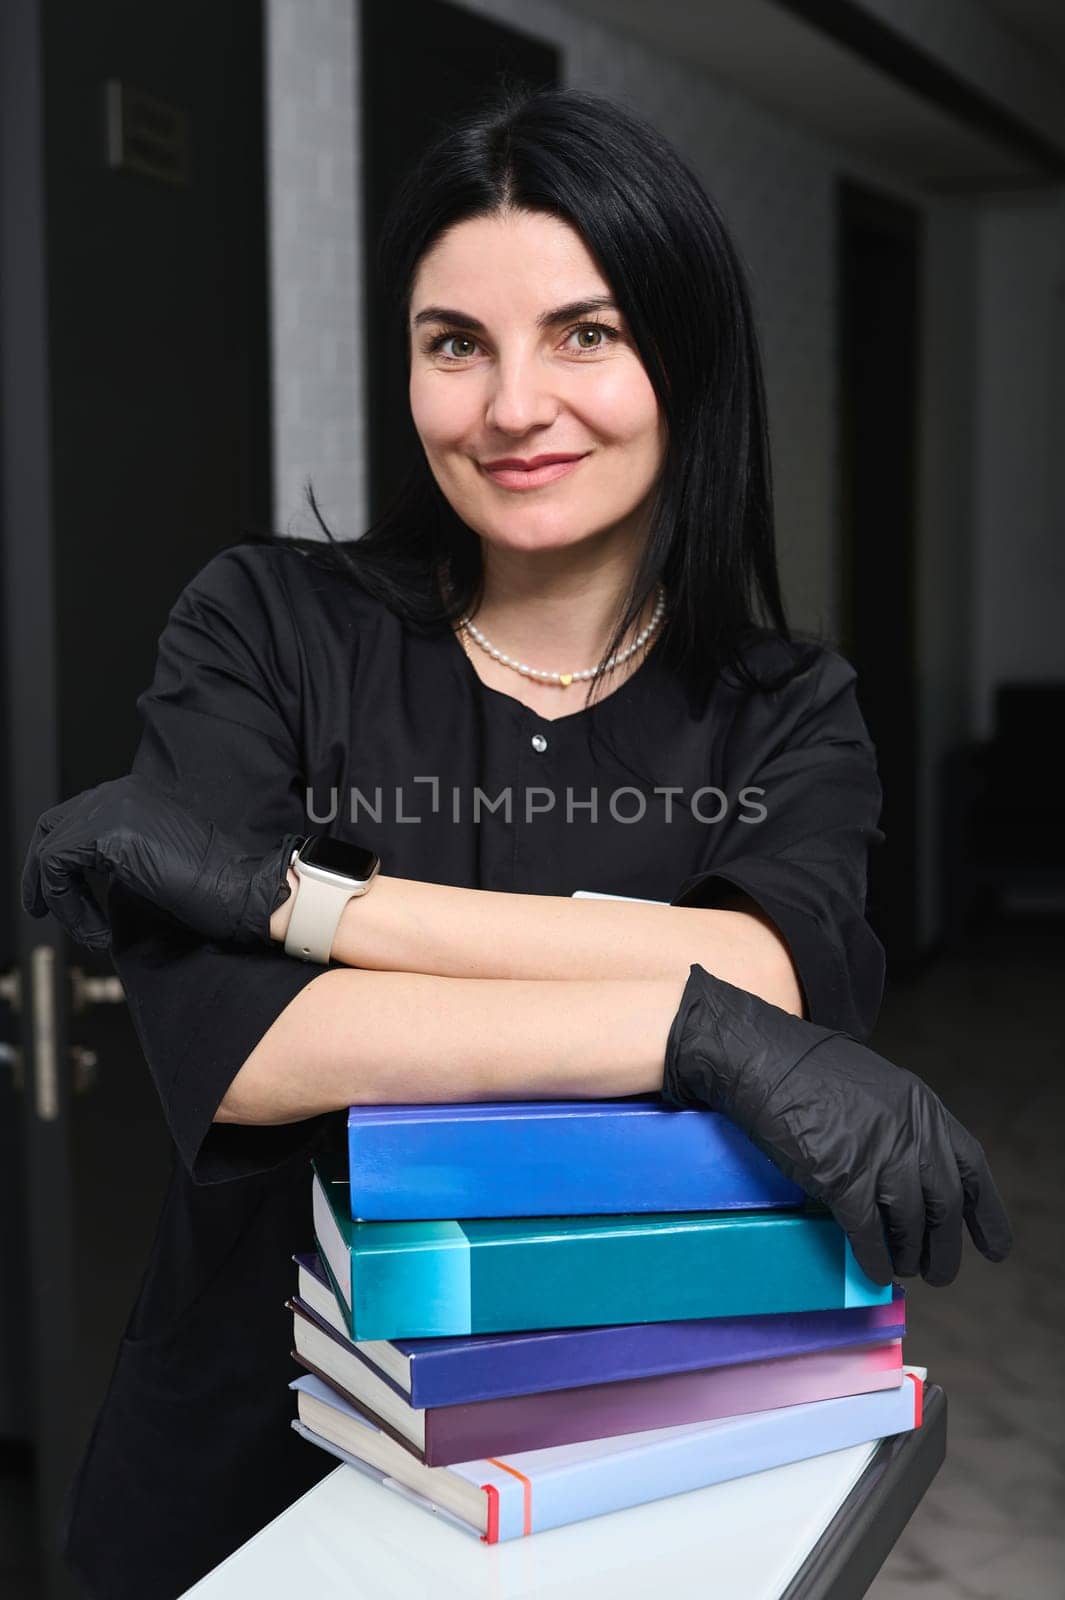 Portrait of an attractive confident experienced woman doctor in a black medical uniform, holding educational books by artgf